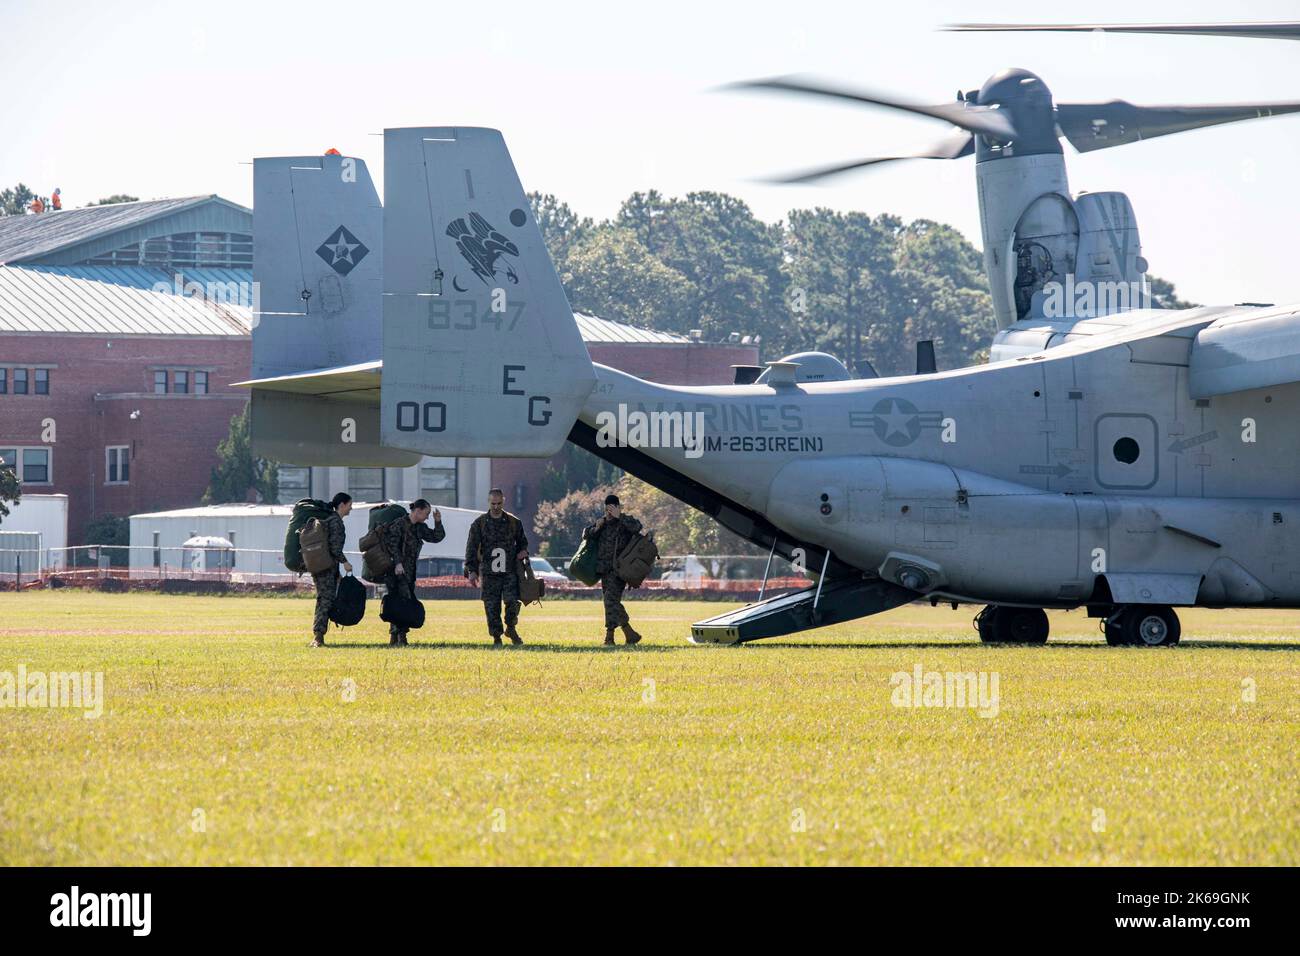 U.S. Marines assigned to the Command Element, 22nd Marine Expeditionary Unit (MEU), exit an MV-22 Osprey aboard Marine Corps Base Camp Lejeune, North Carolina, Oct. 11, 2022. Marines and Sailors assigned to the 22nd MEU returned home after completing a seven-month deployment with the Kearsarge Amphibious Ready Group in the U.S. Naval Sixth Fleet area of operations. (U.S. Marine Corps photo by Sgt. Mason Roy) Stock Photo